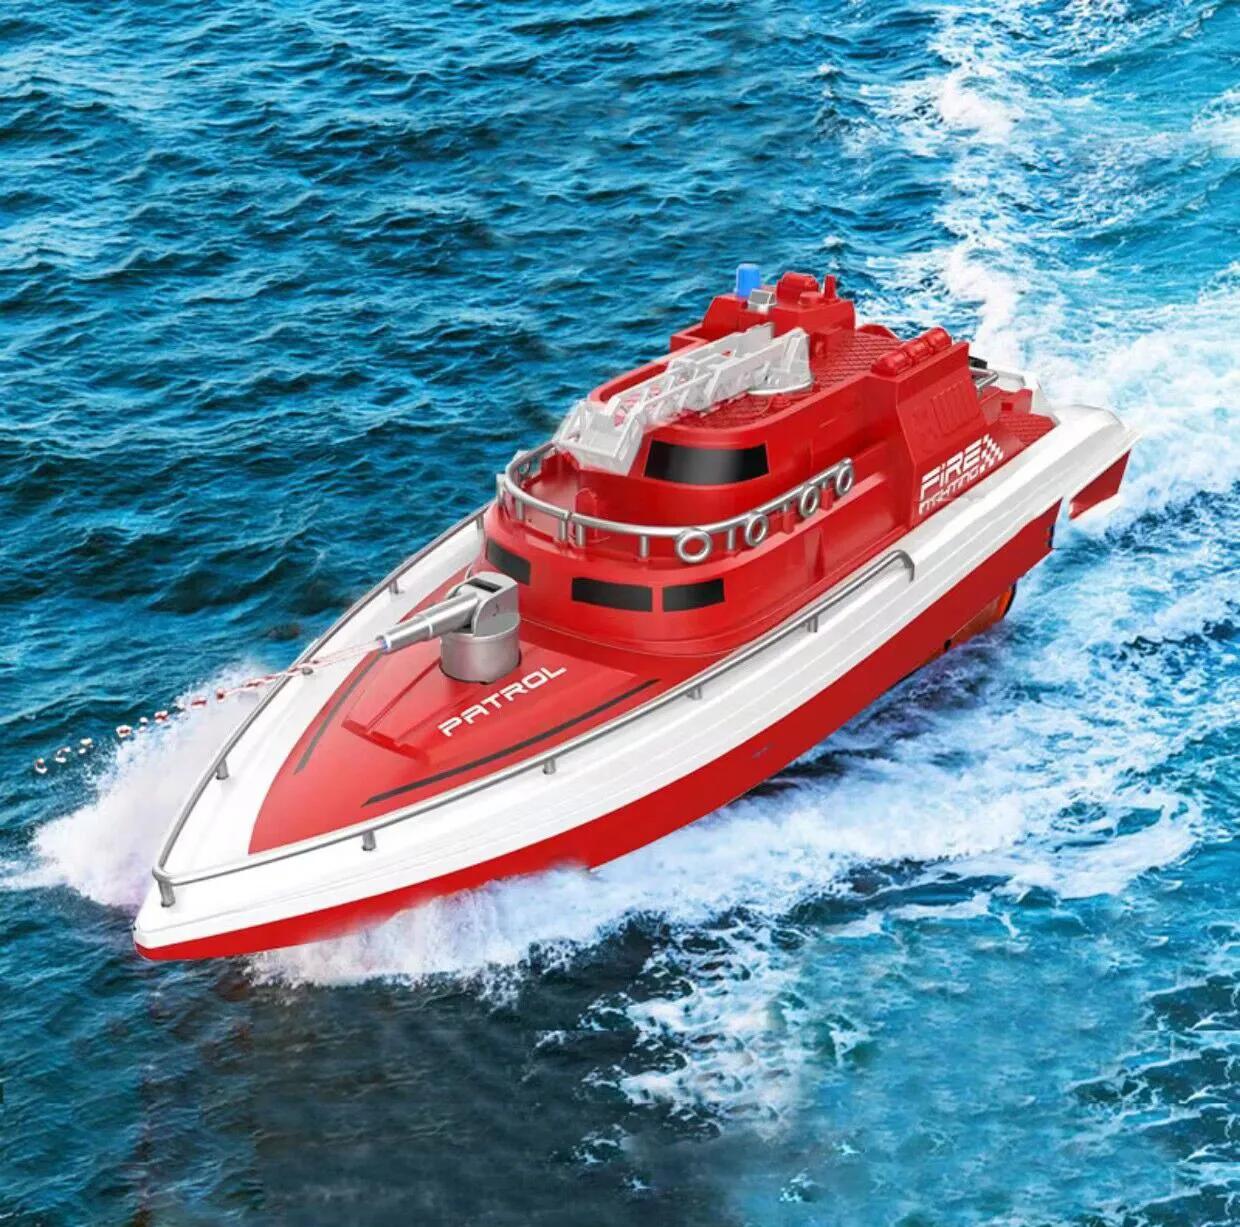 Remote Control Fire Boat: Top 5 Remote Control Fire Boats: Features and Prices